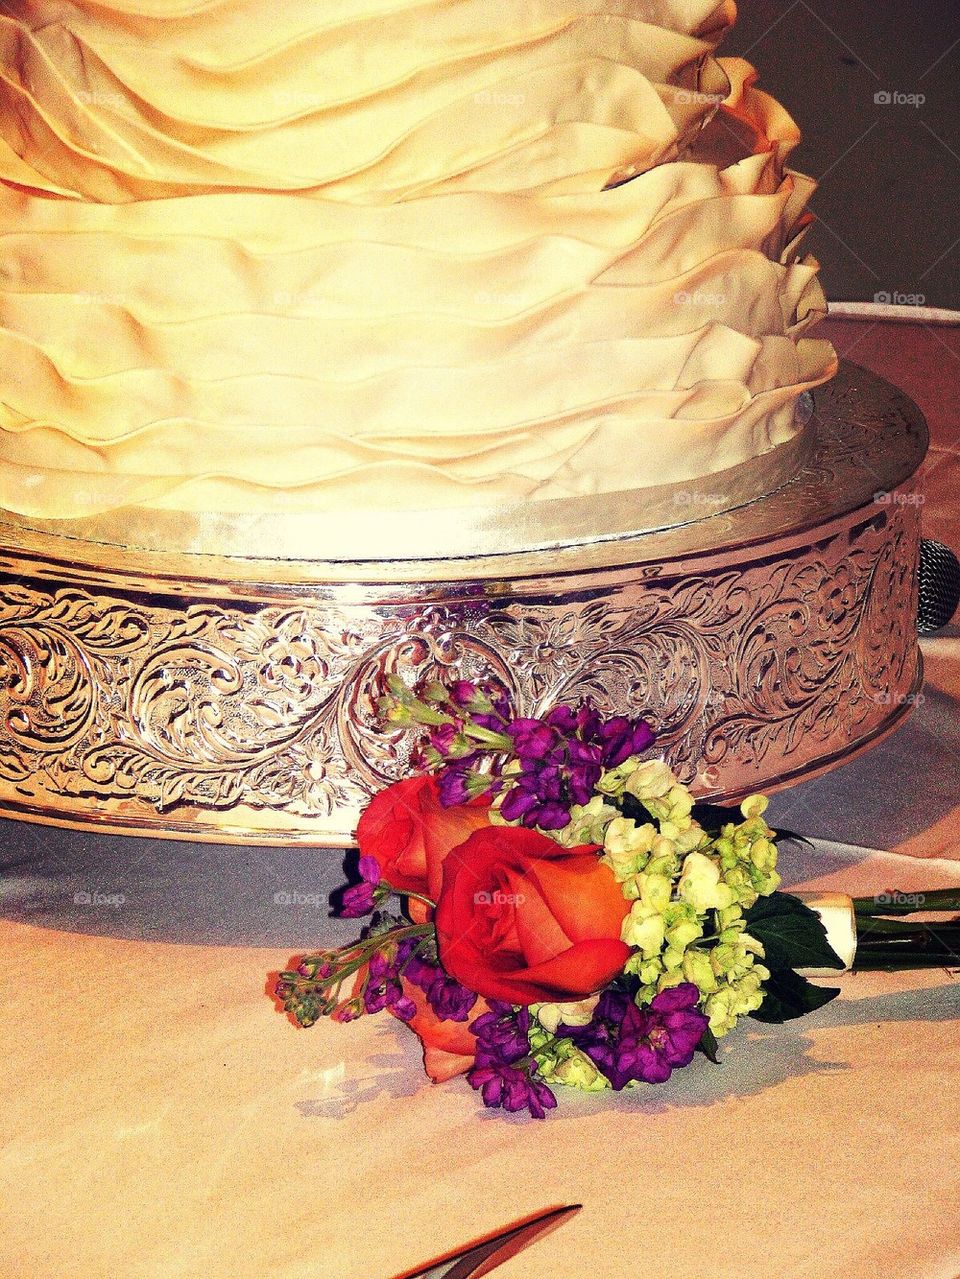 Cake and Flower